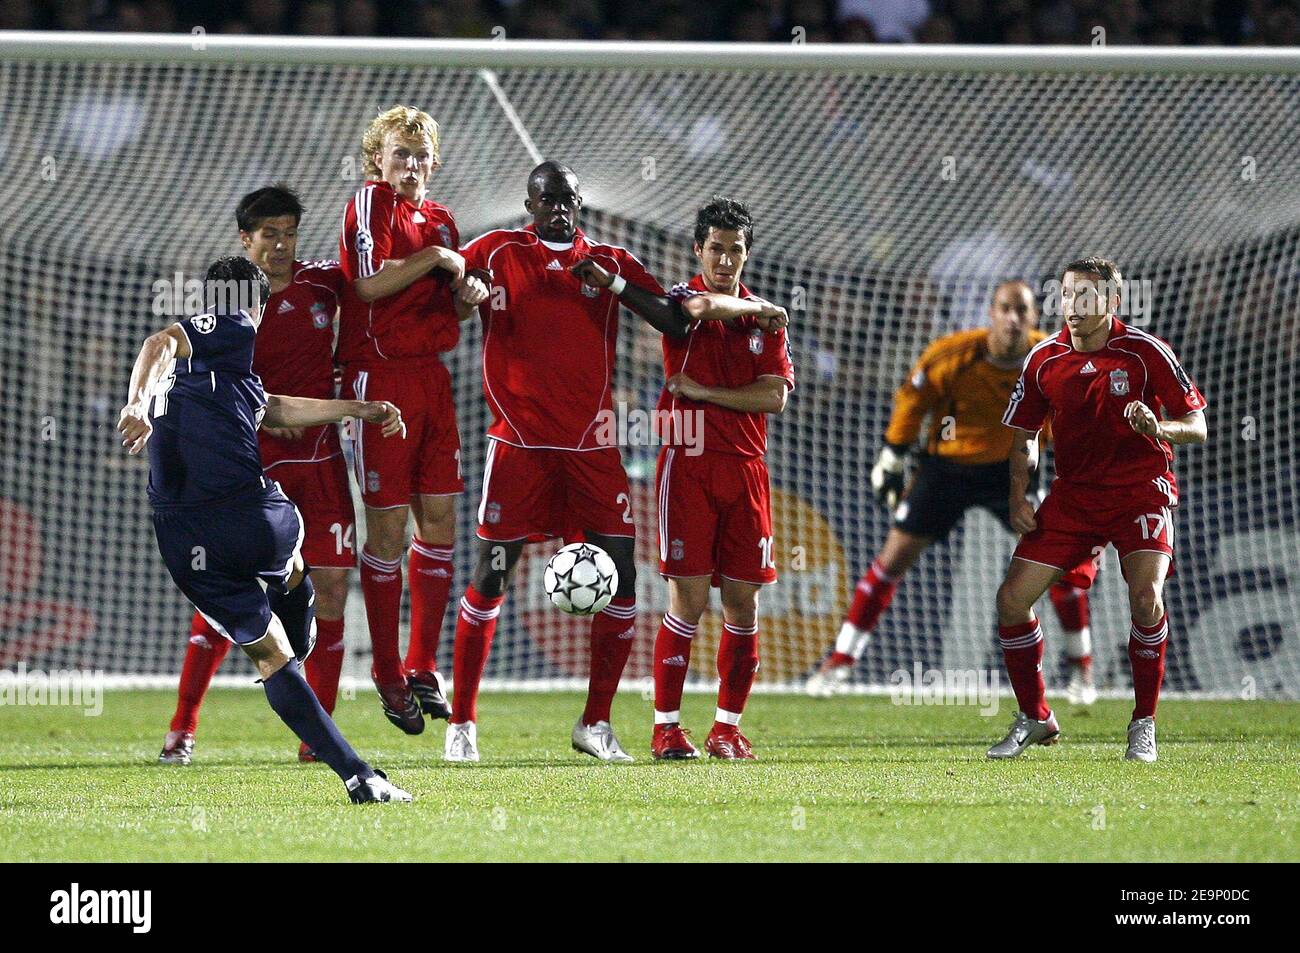 Bordeaux' Johan Micoud takes a free kick during the UEFA Champions League, Group C, Girondins de Bordeaux vs Liverpool FC at the Stade Chaban-Delmas in Bordeaux, France on October 18, 2006. Liverpool won 1-0. Photo by Christian Liewig/ABACAPRESS.COM Stock Photo